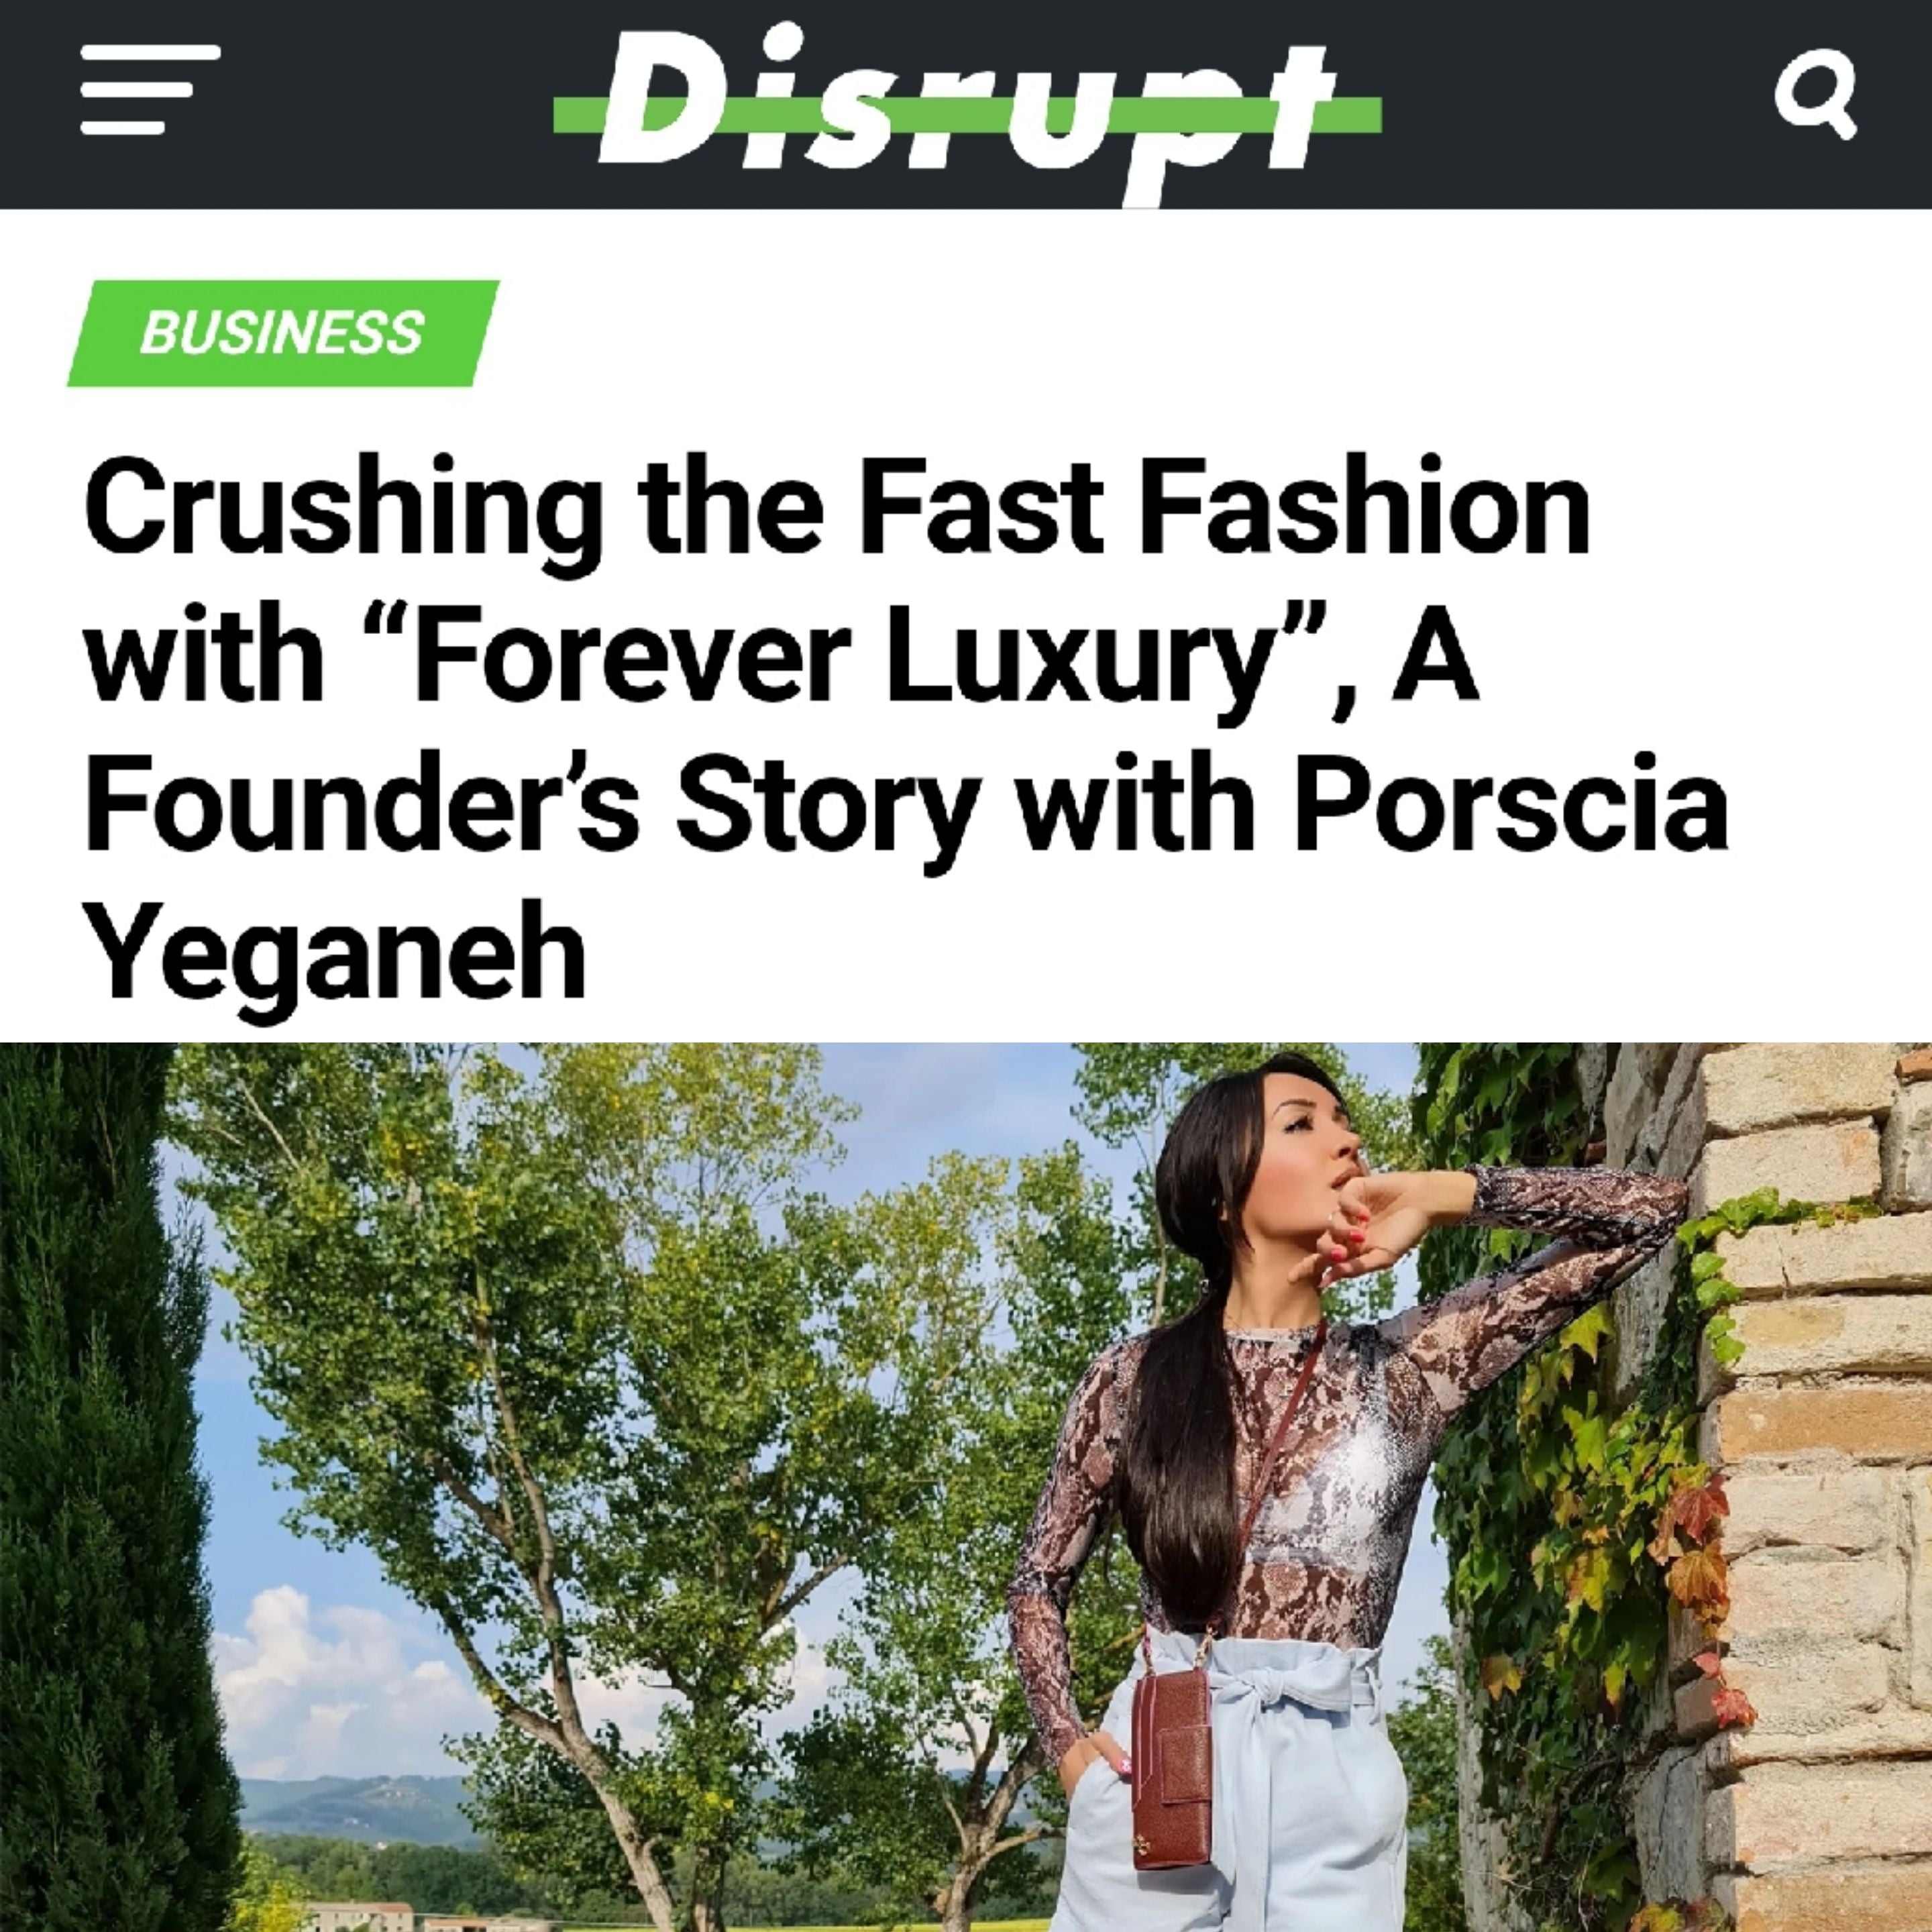 Crushing the Fast Fashion with “Forever Luxury”